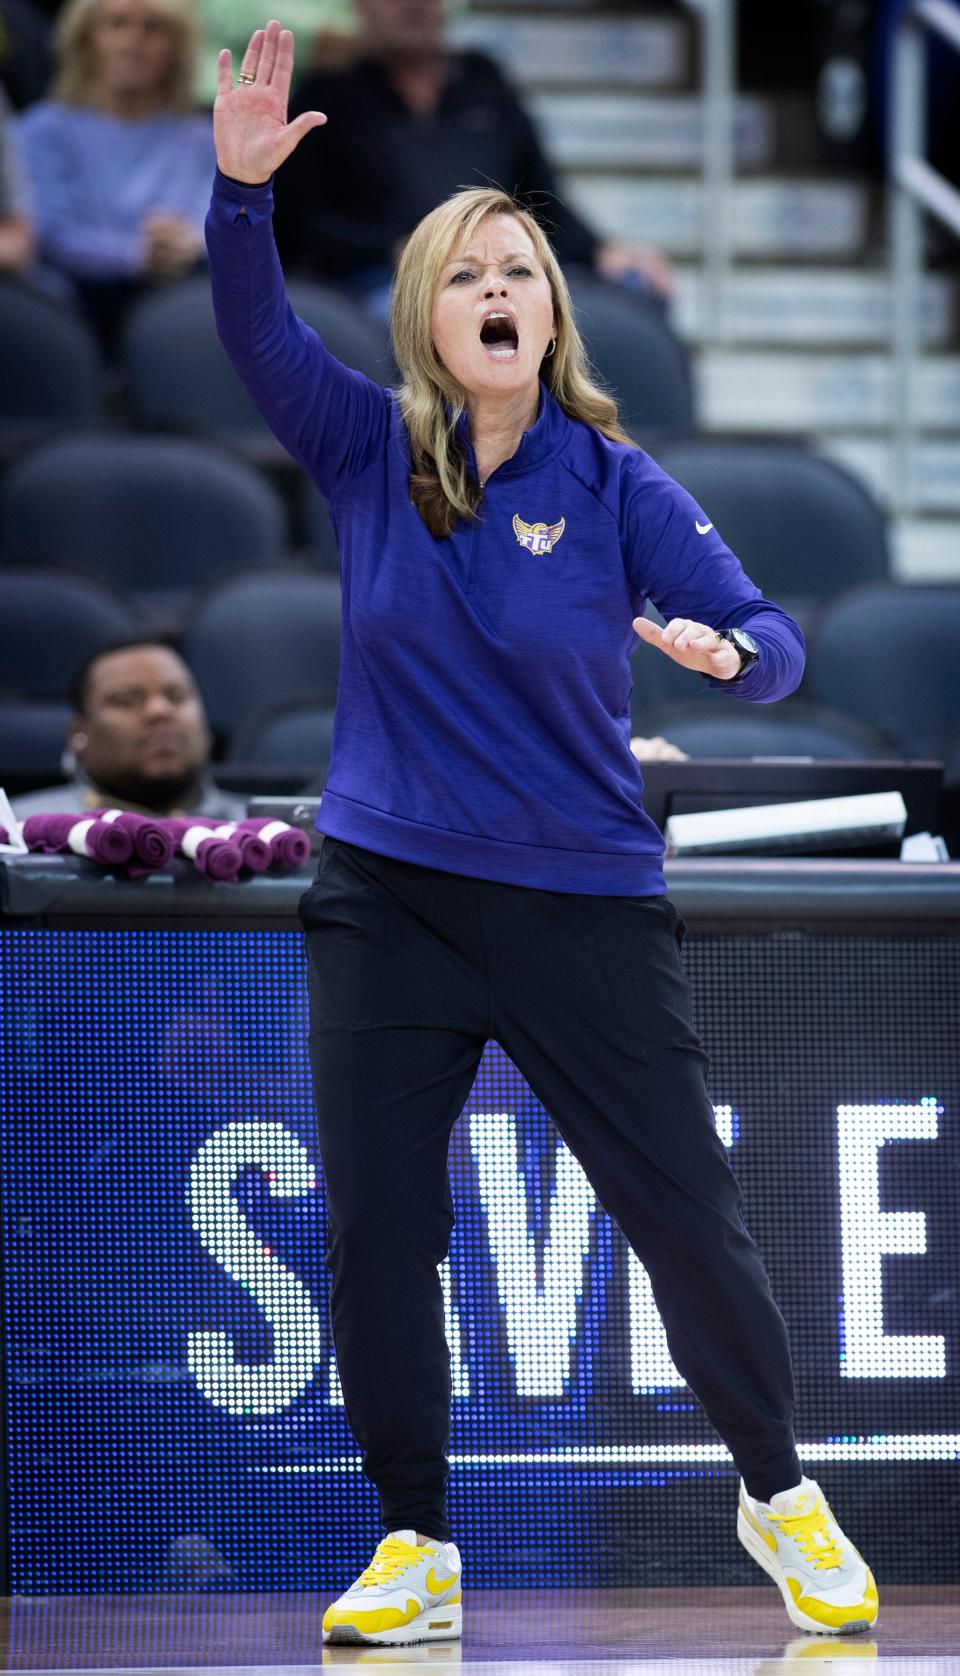 Tennessee Tech Head Coach Kim Rosamond calls plays from the sideline against Southern Illinois-Edwardsville during their quarterfinal game of the Ohio Valley Conference Women's Basketball Championship at Ford Center in Evansville, Ind., Thursday afternoon, March 2, 2023.